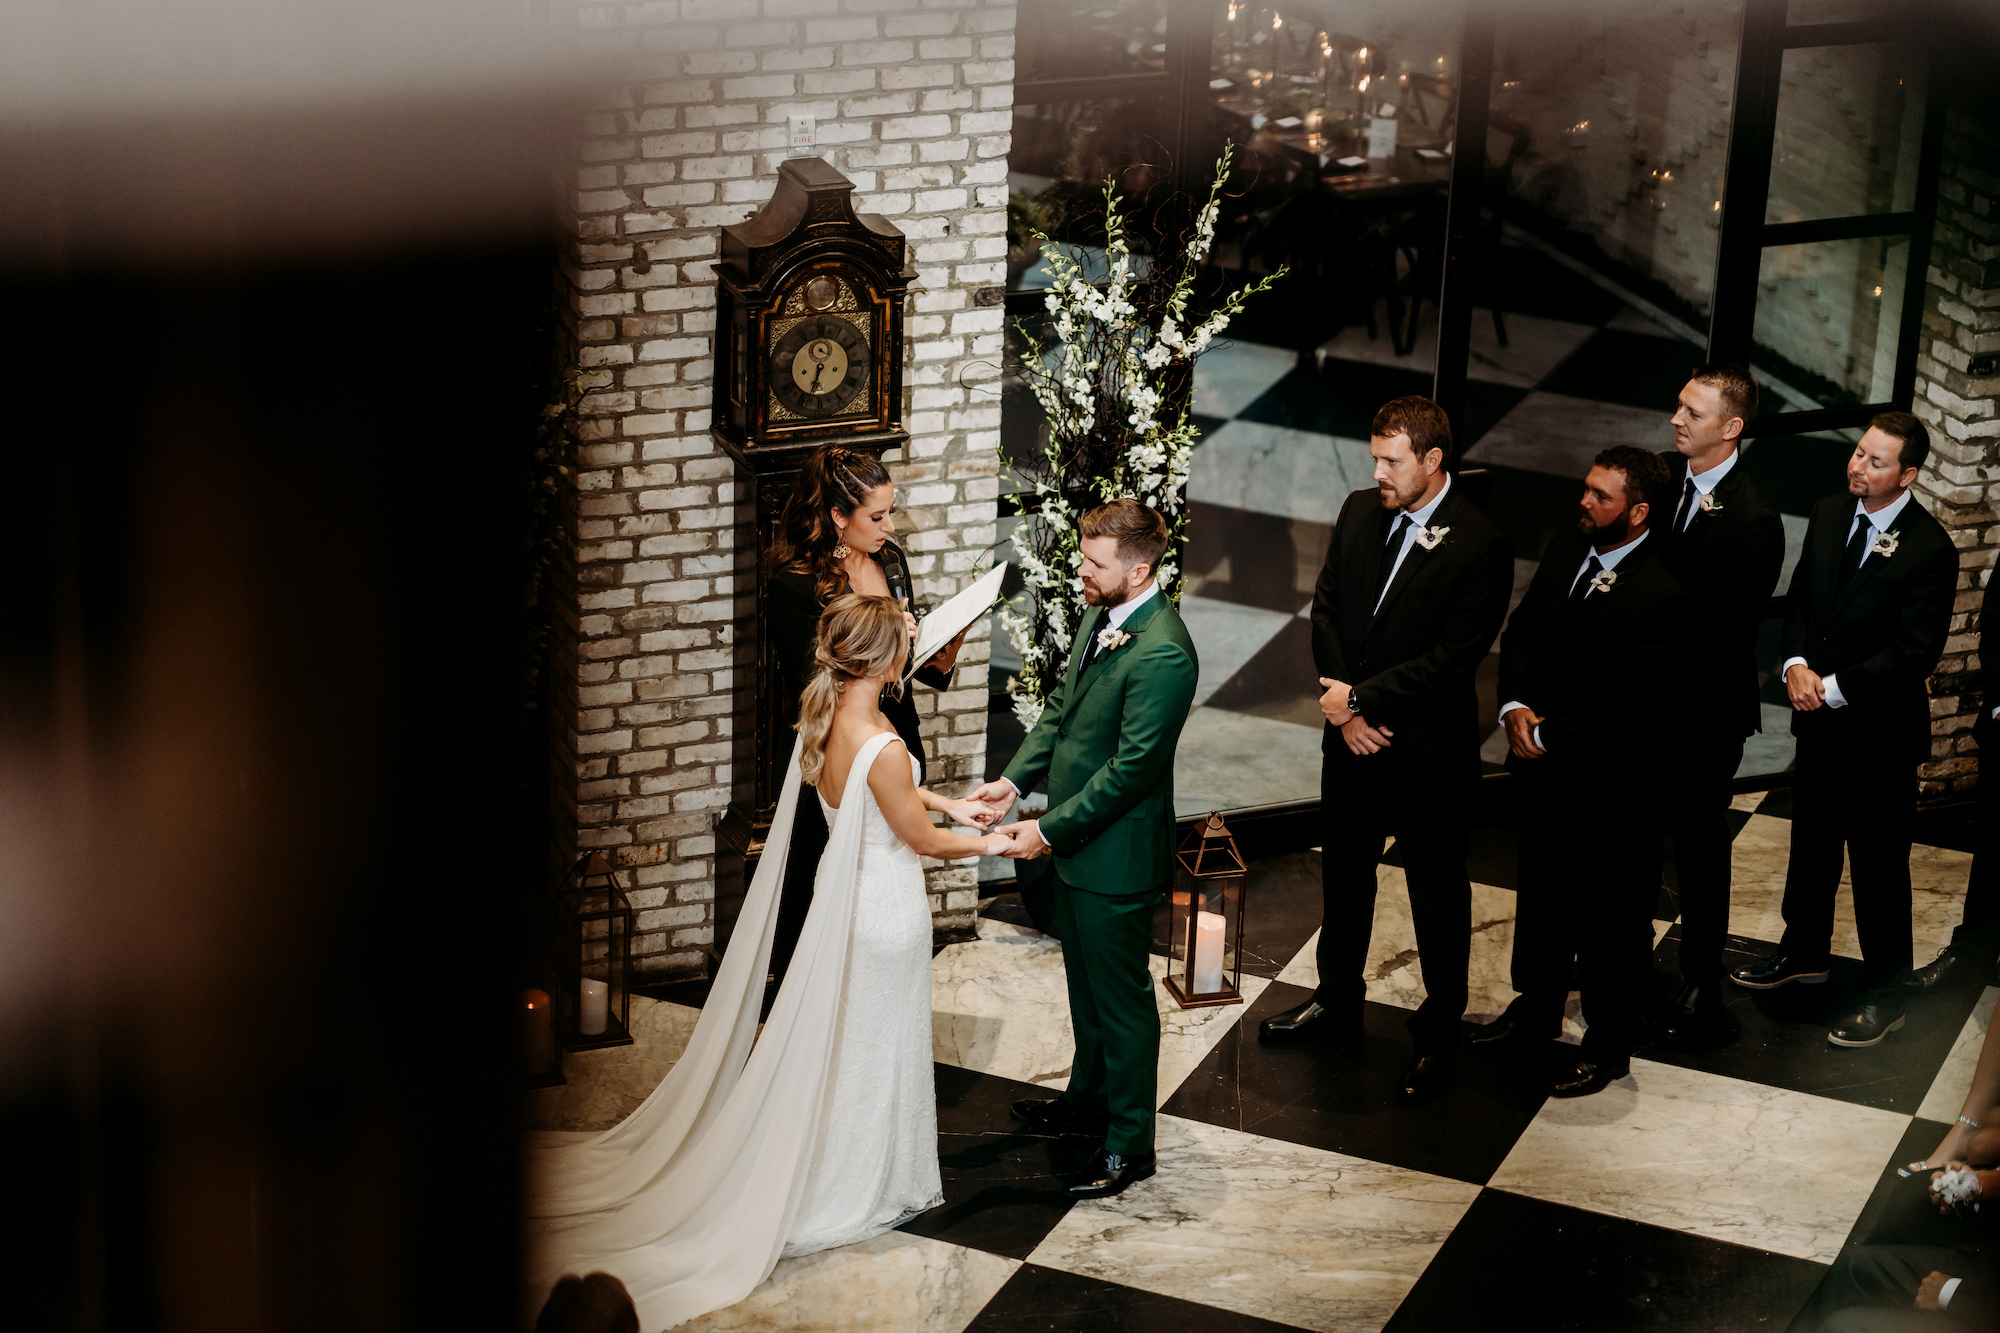 Modern Timeless Indoor Wedding Ceremony on Checkered Floor with Minimalistic Design Details | South Tampa Venue Oxford Exchange | Planner Special Moments